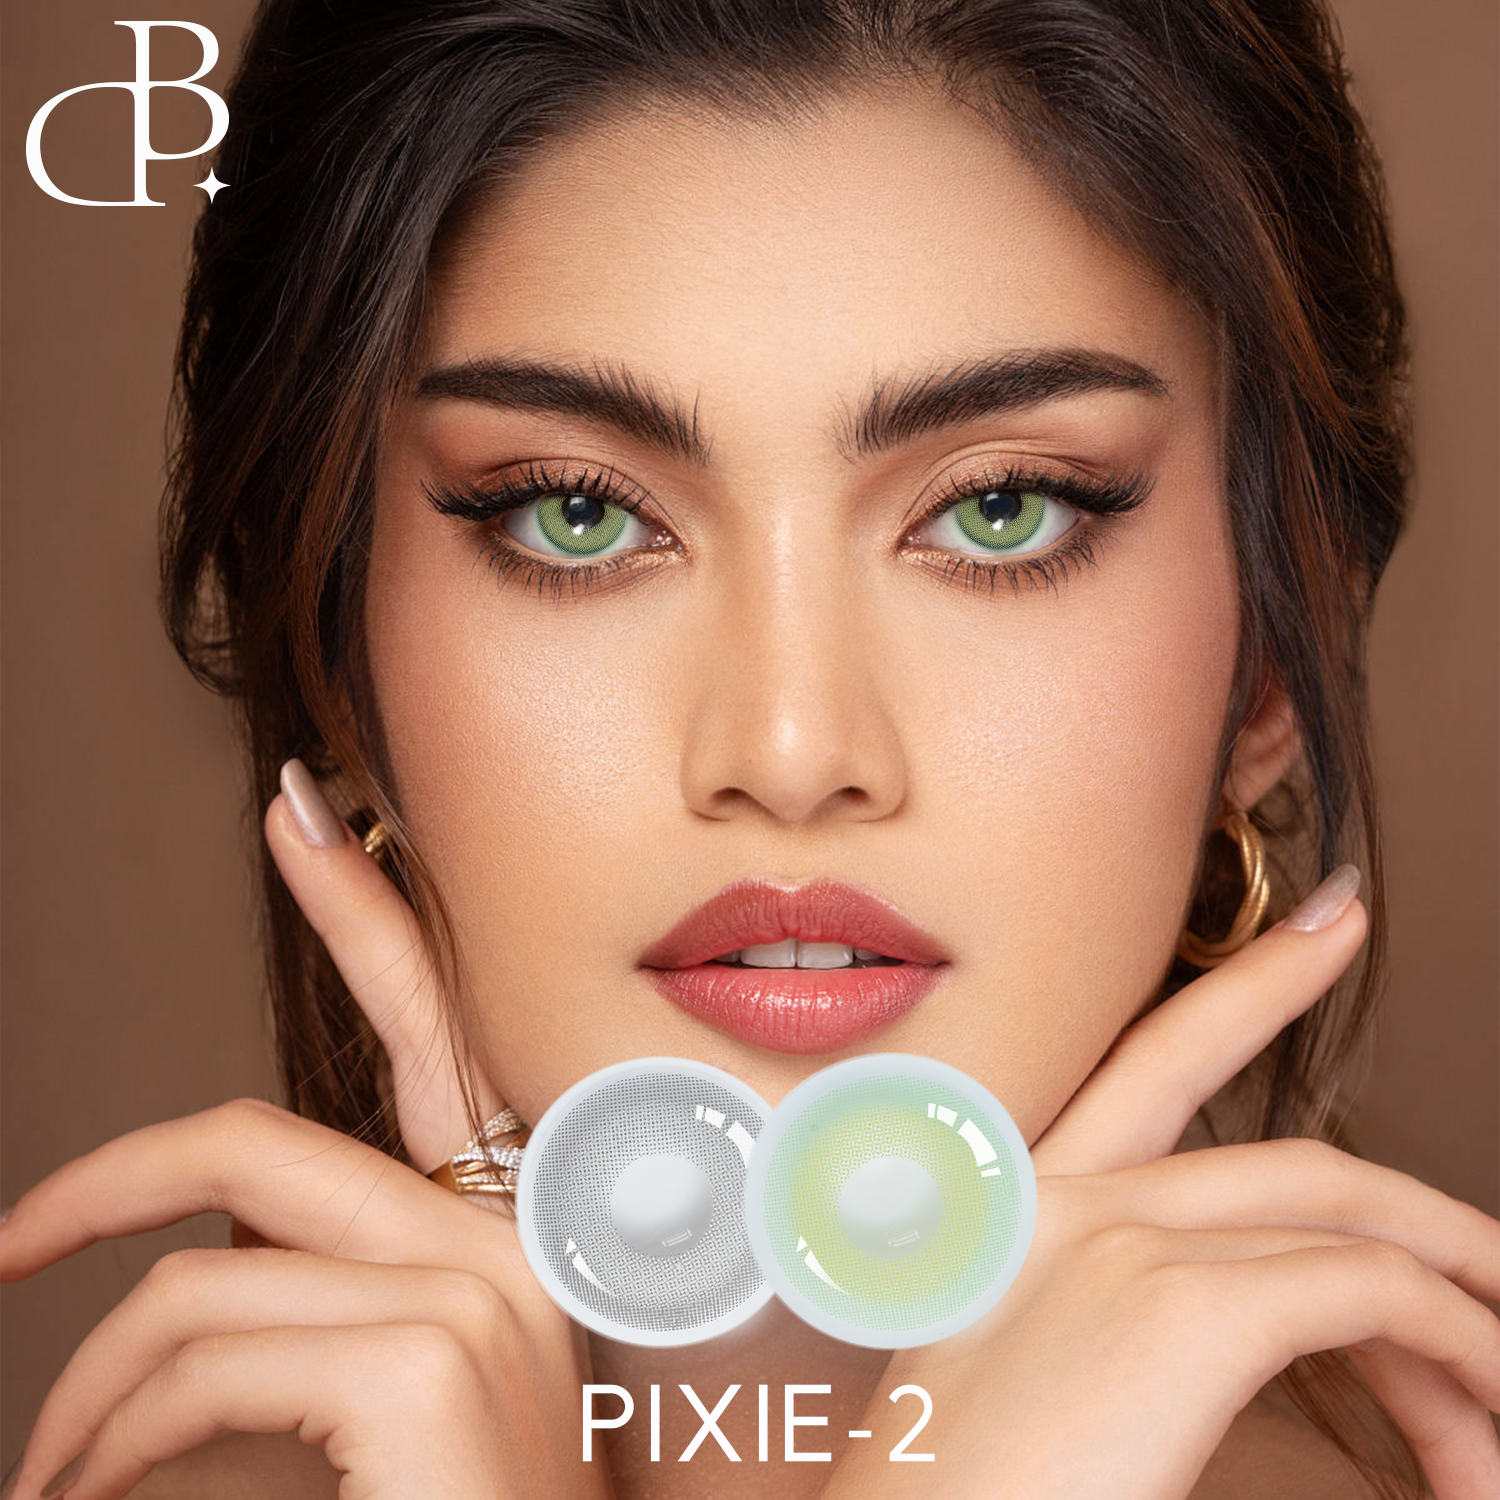 PIXIE-2 15.00mm dbeyes lens Brand Wholesale 9 Month Cosmetic Contact Lens Chinese Supplier Prescription Colored Contact Lenses For Brown Eyes